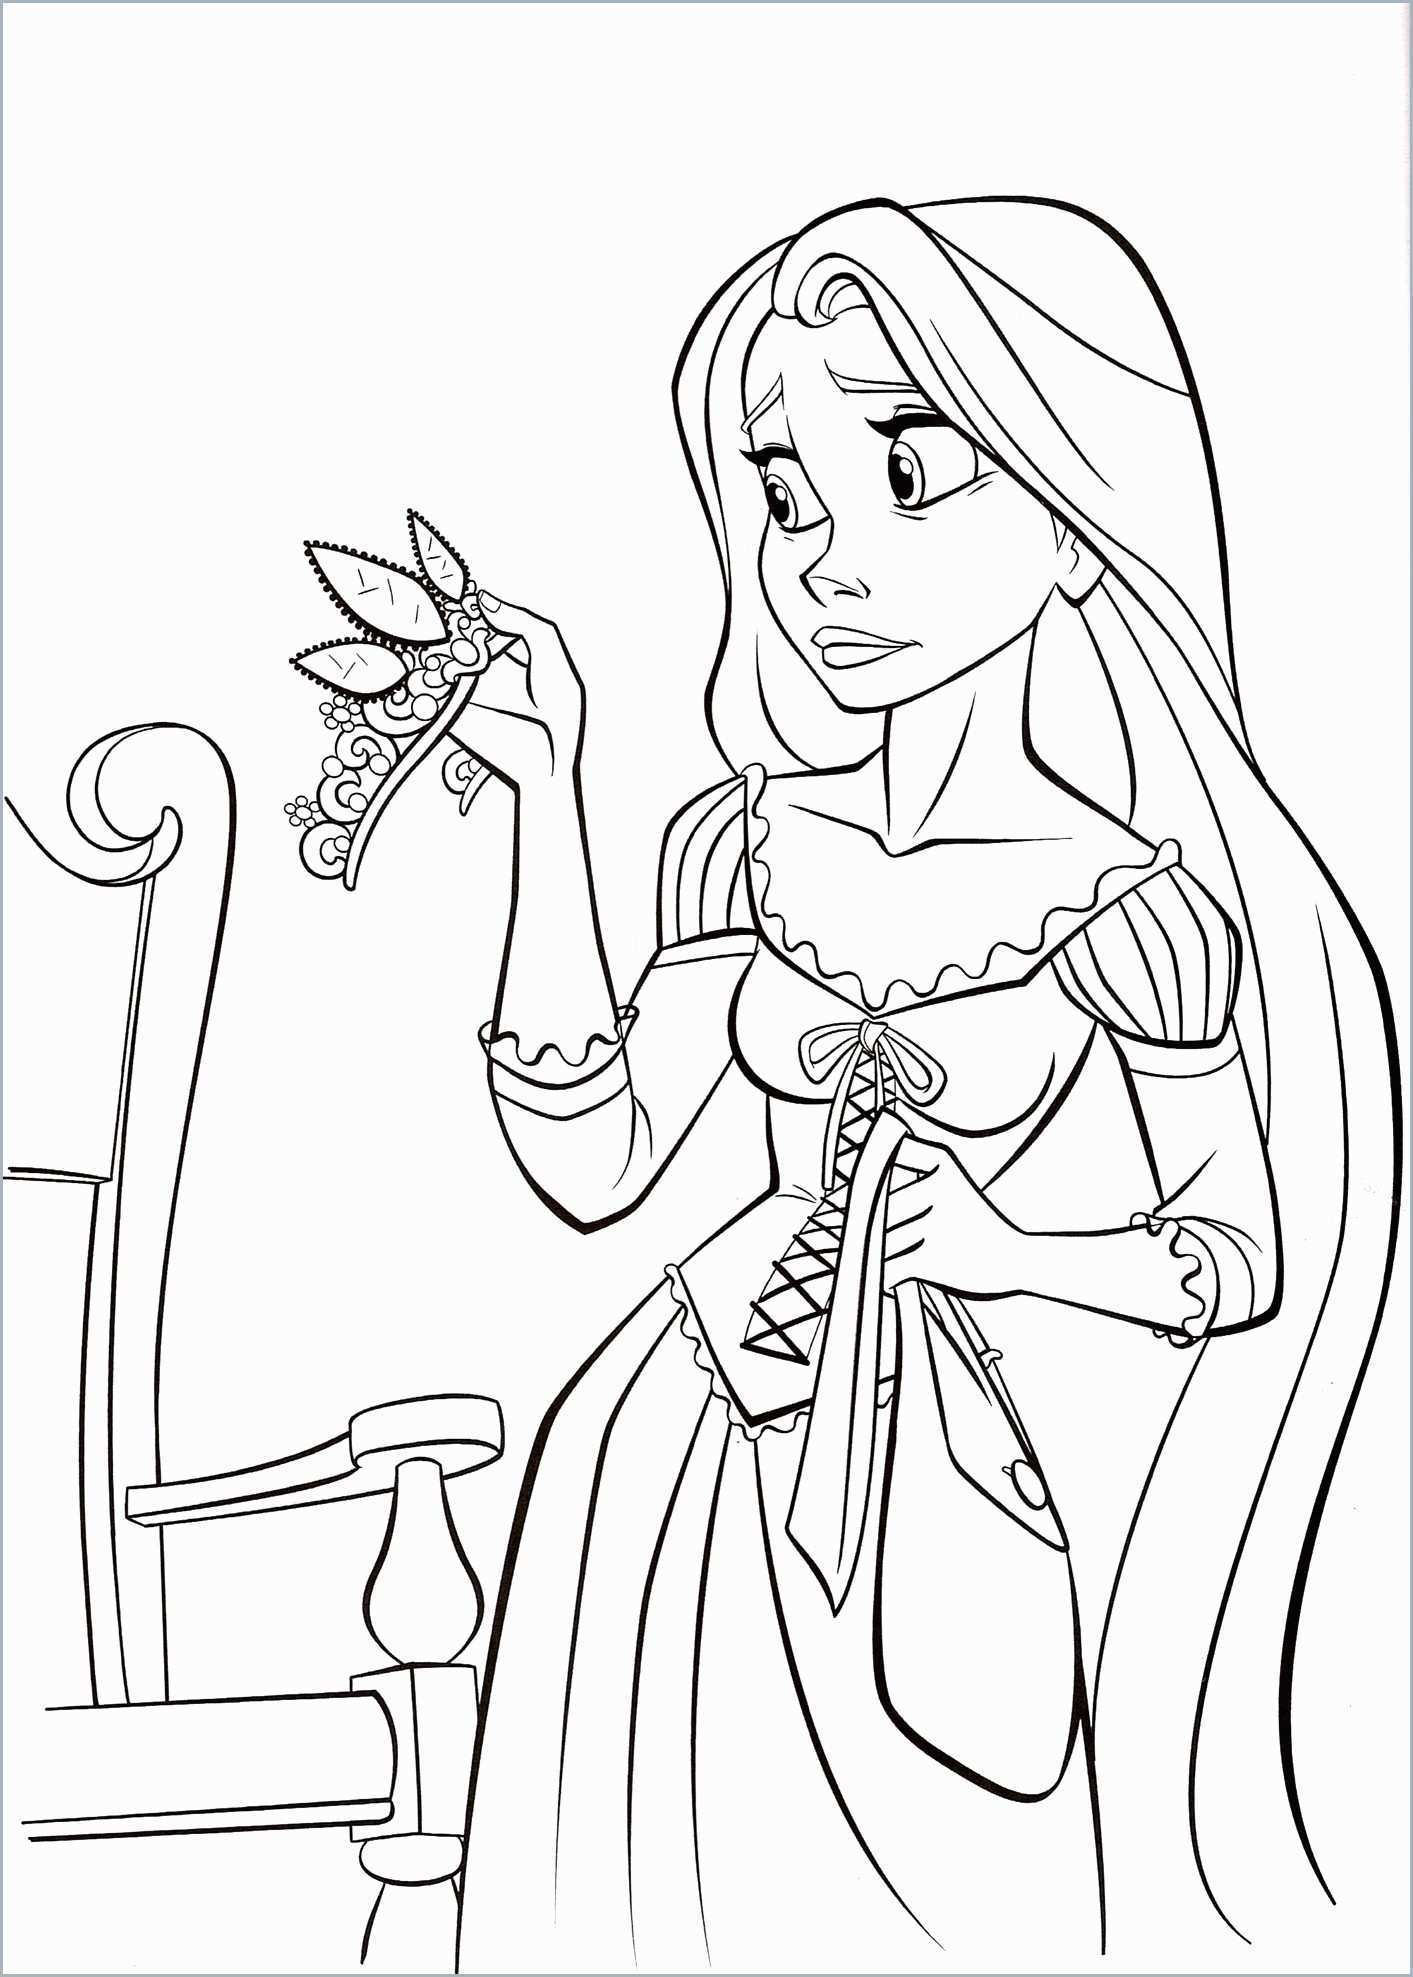 Coloring Pages : Coloring Book Pages Disney Princess Astonishing - Free Printable Tangled